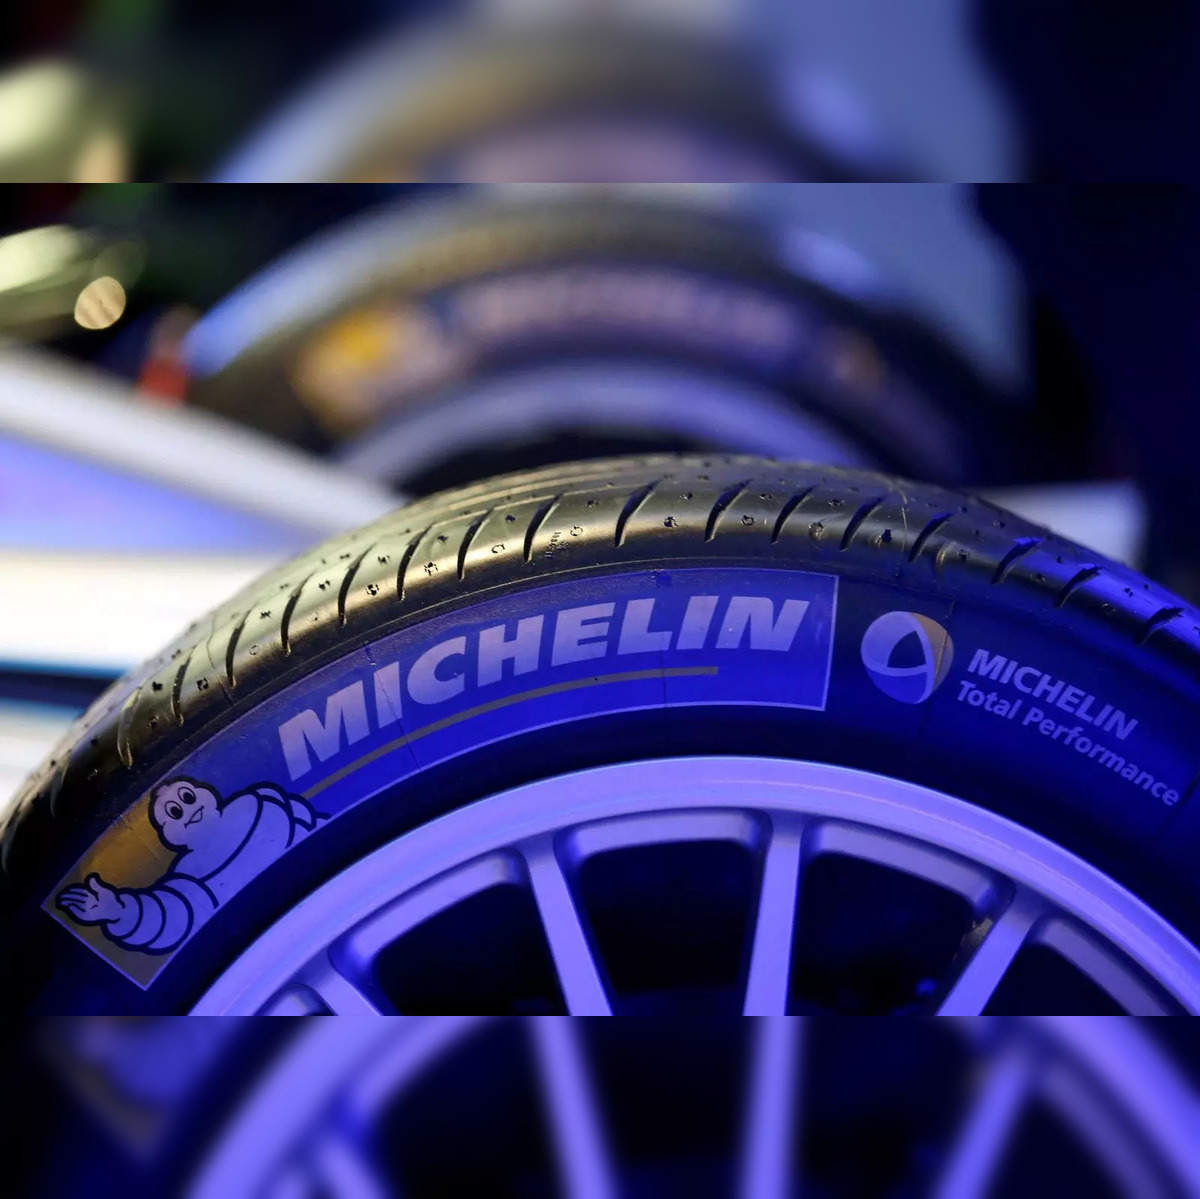 Michelin tyre gets industry's first fuel savings label with 4-star rating  by BEE - The Economic Times